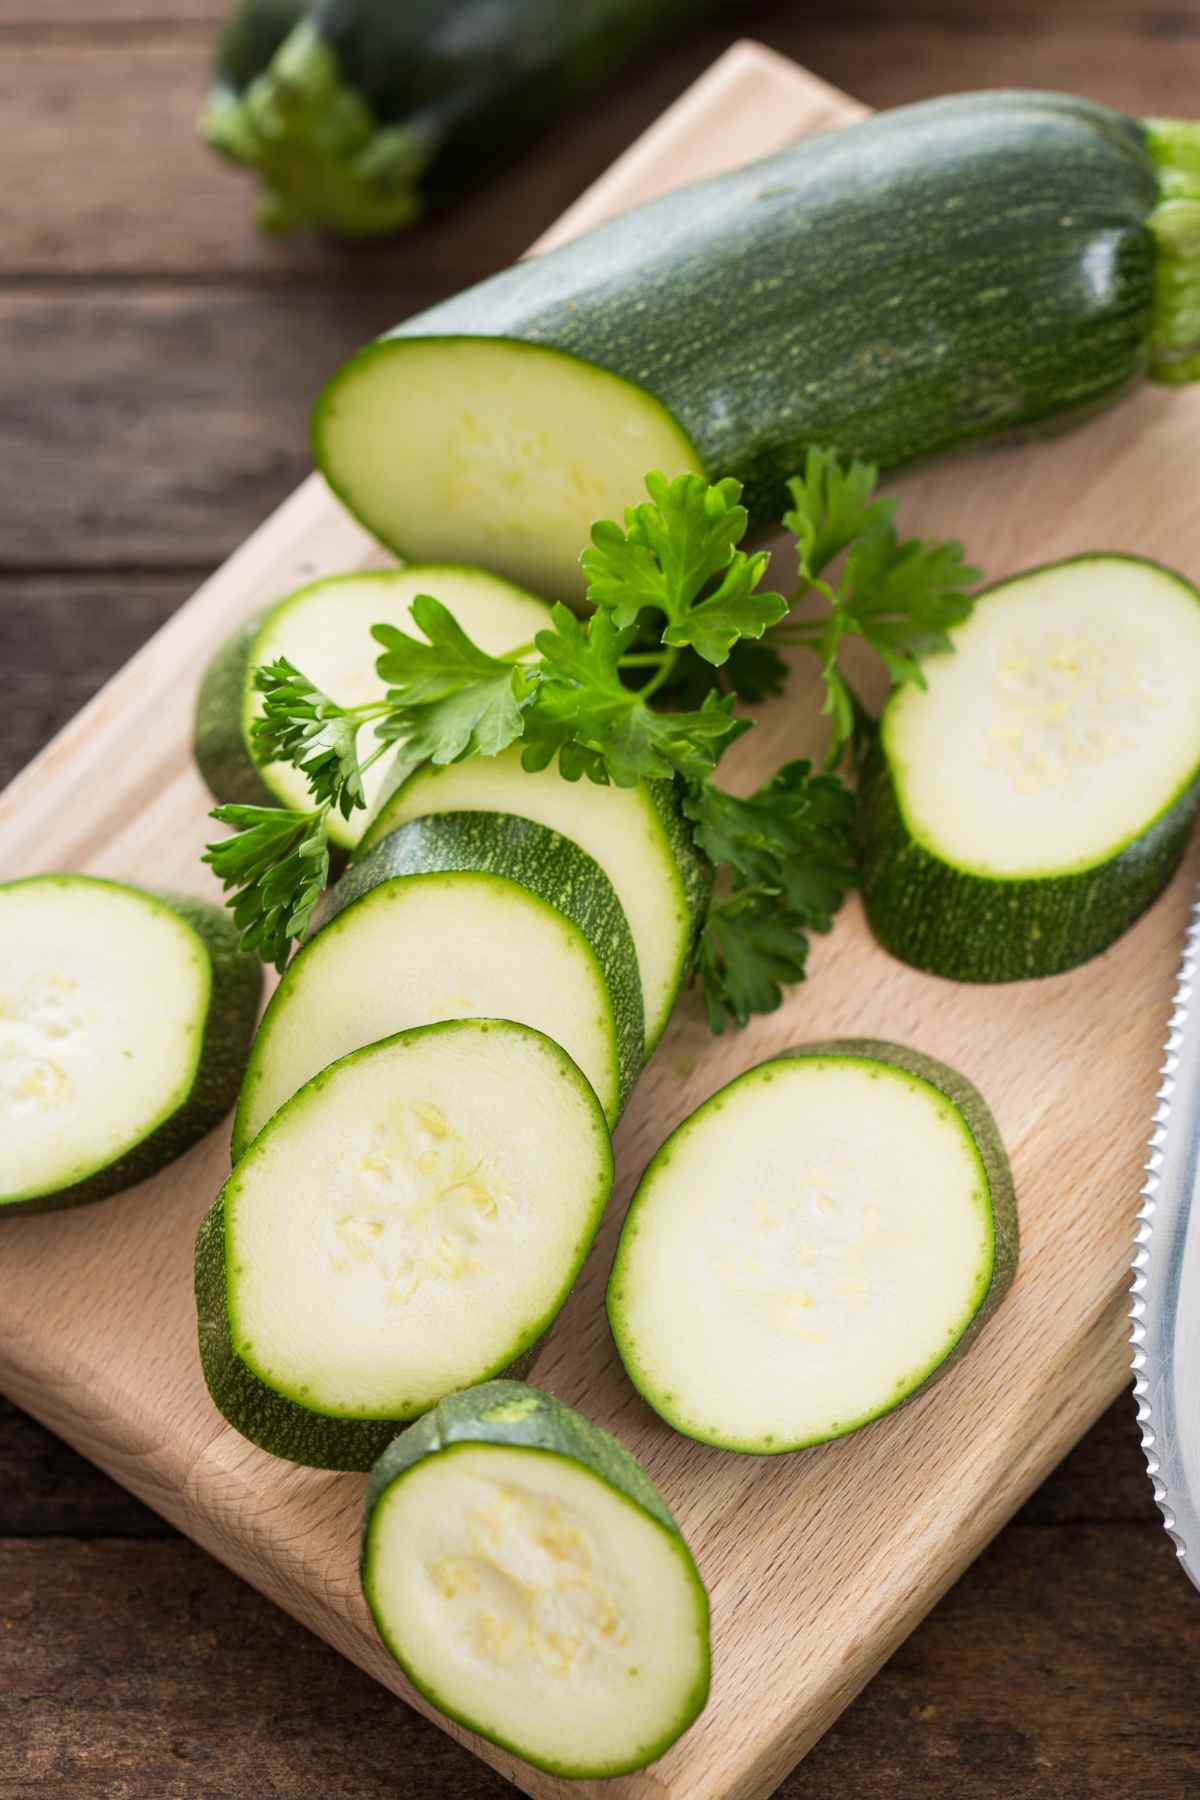 Is Zucchini Keto-Friendly? How many carbs are there in zucchini? In this post, you’ll find all the answers to these questions, plus tips and recipes on how to enjoy this delicious veggie on a keto diet!